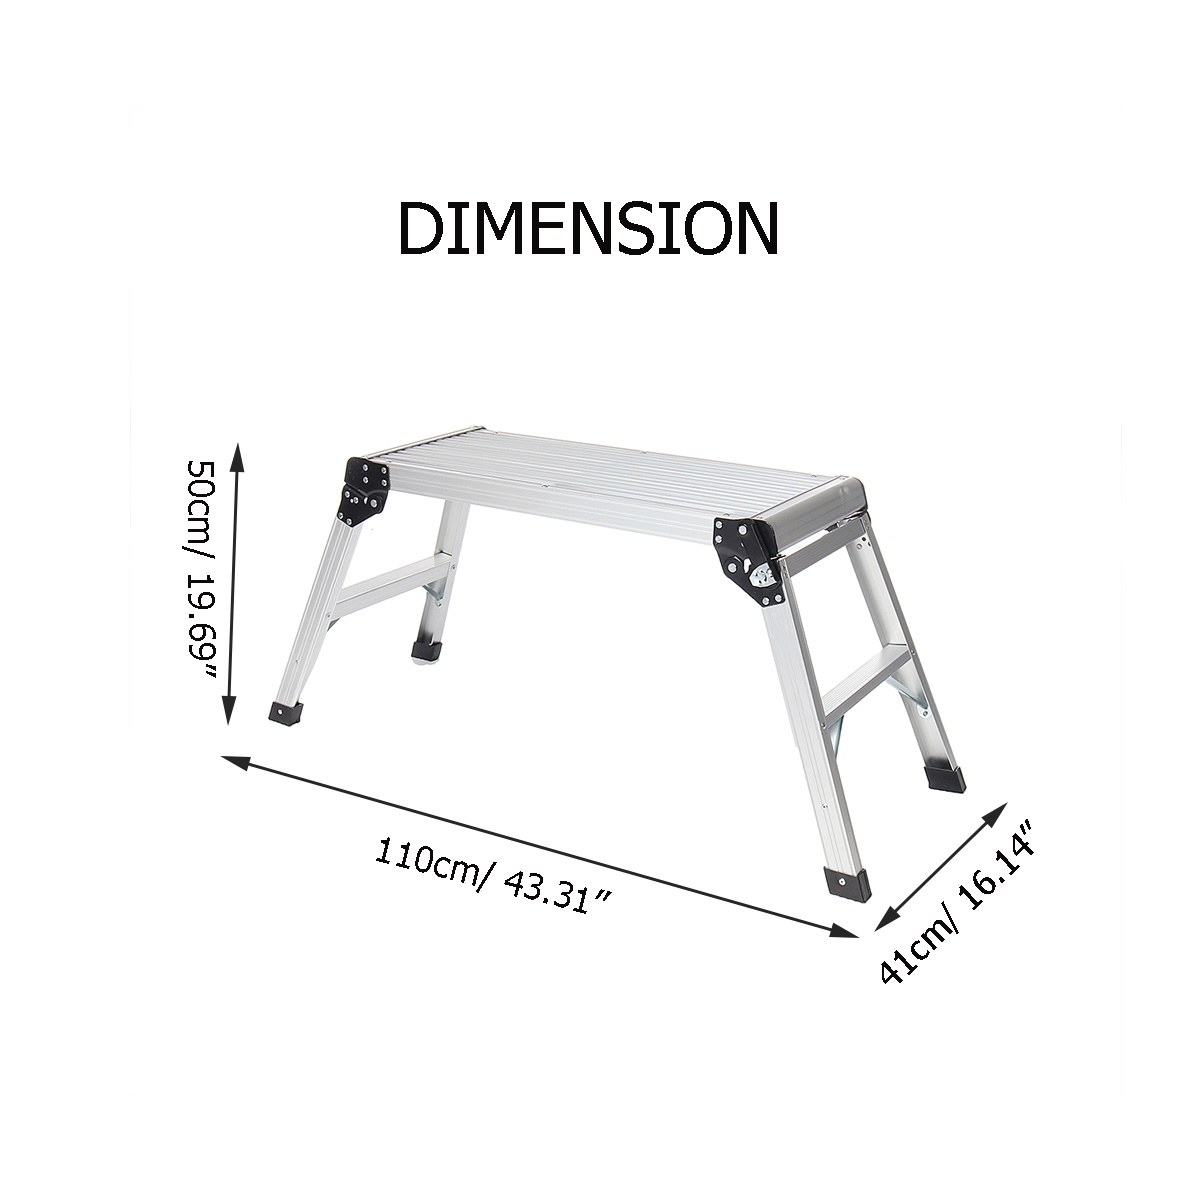 Folding Aluminum Alloy Platform Step Up Stool Step Ladders Non-Slip Work Bench Drywall Ladder Construction Tools Home Warehouse